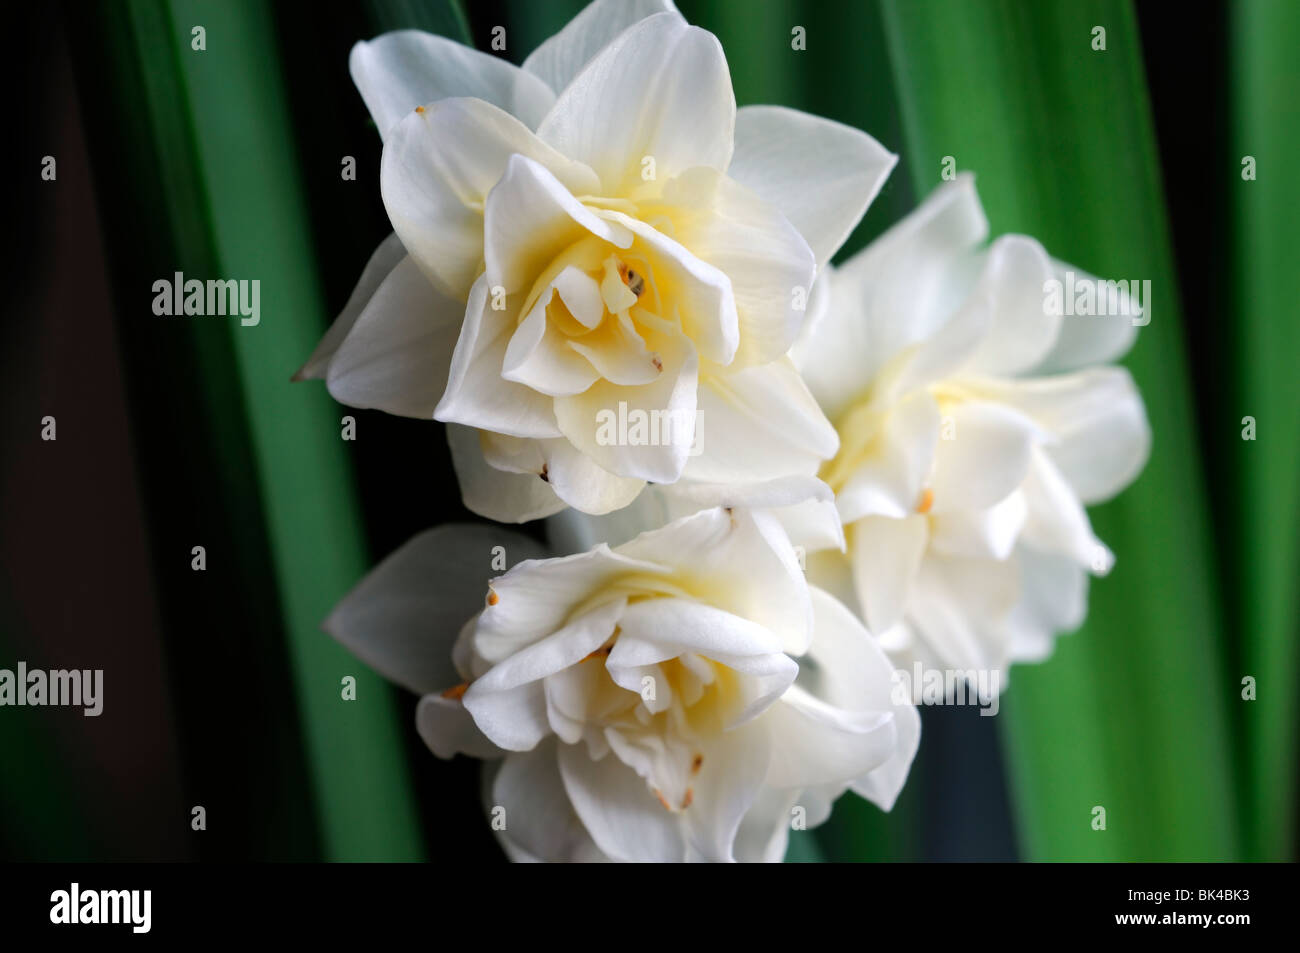 Narcissus 'Erlicheer' Division 4 Double Daffodil macro photo Close up  multi-headed yellow white flower bloom blossom Stock Photo - Alamy